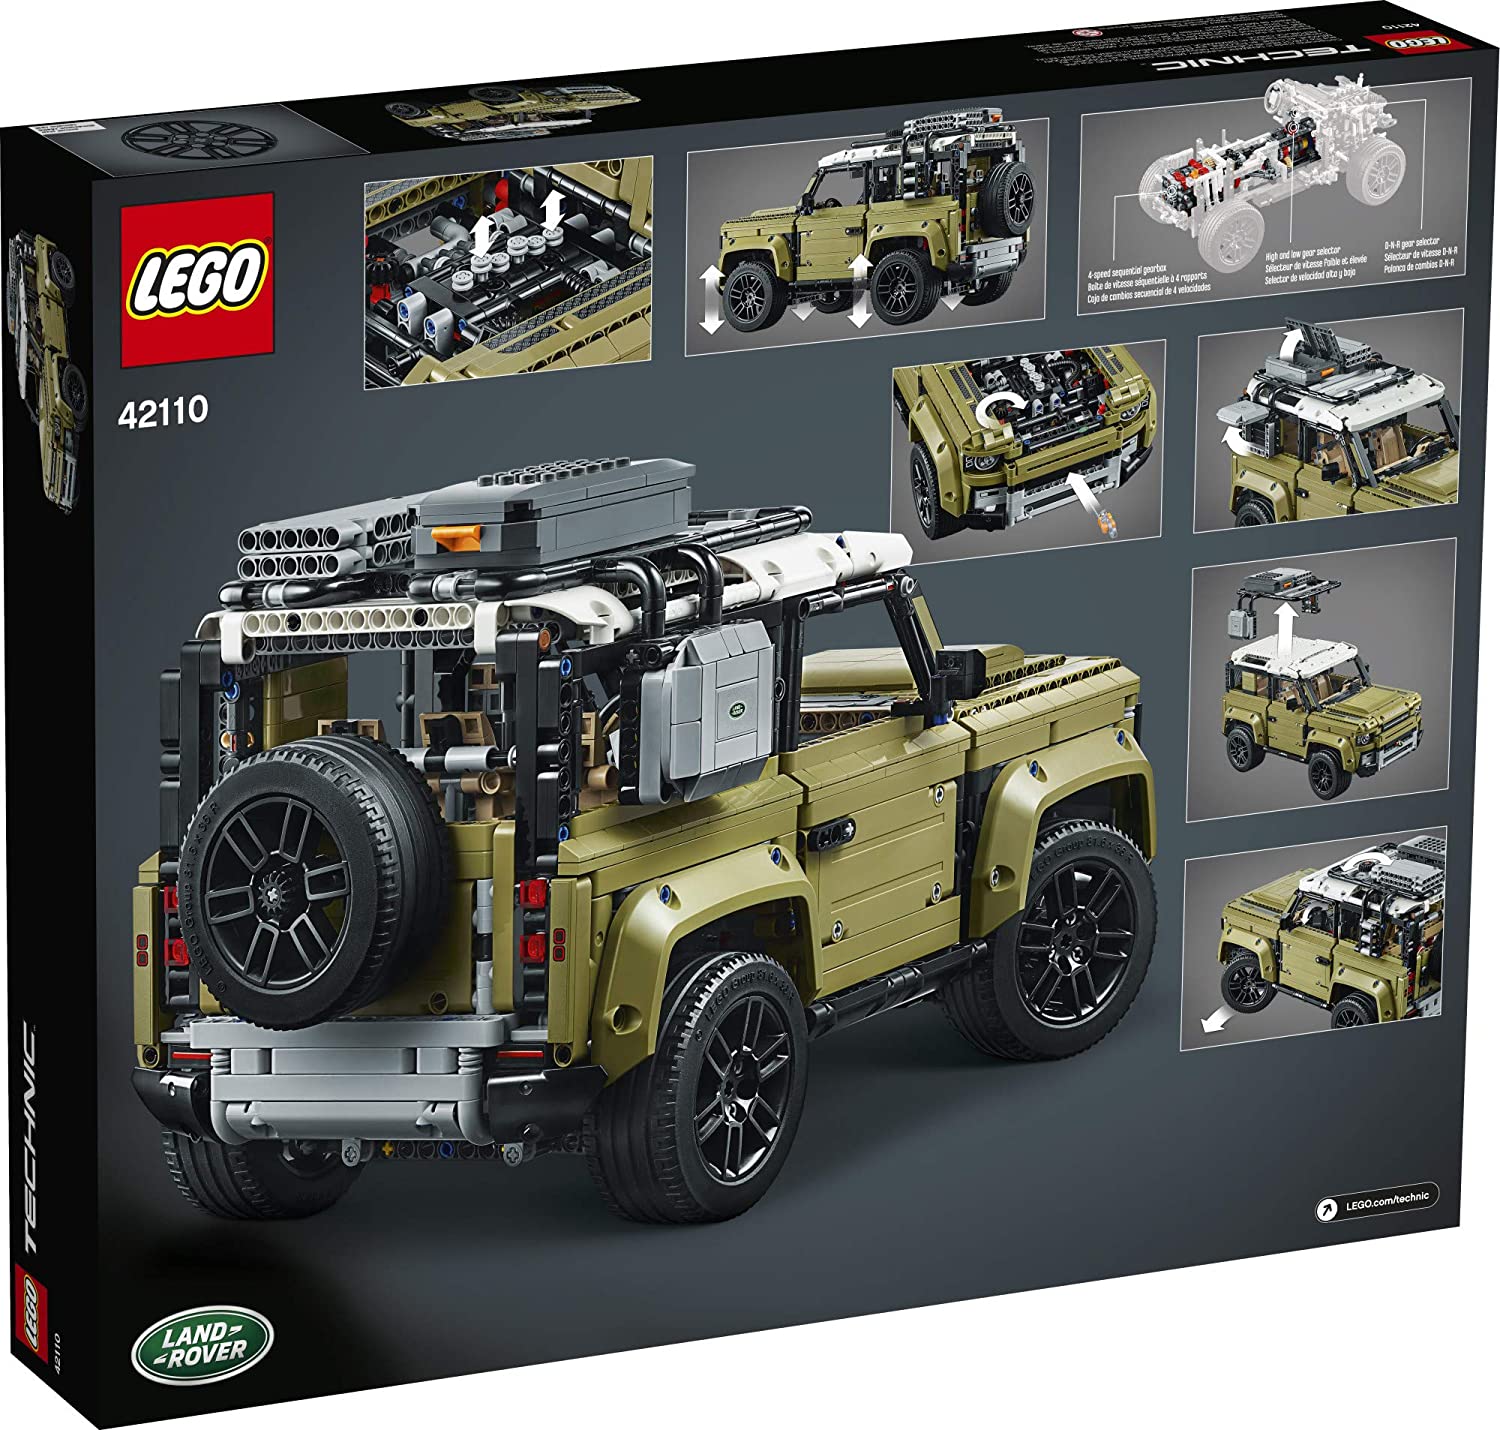 Lego Technic Land Rover Defender Building Kit, 2573 Pieces, -- ANB Baby